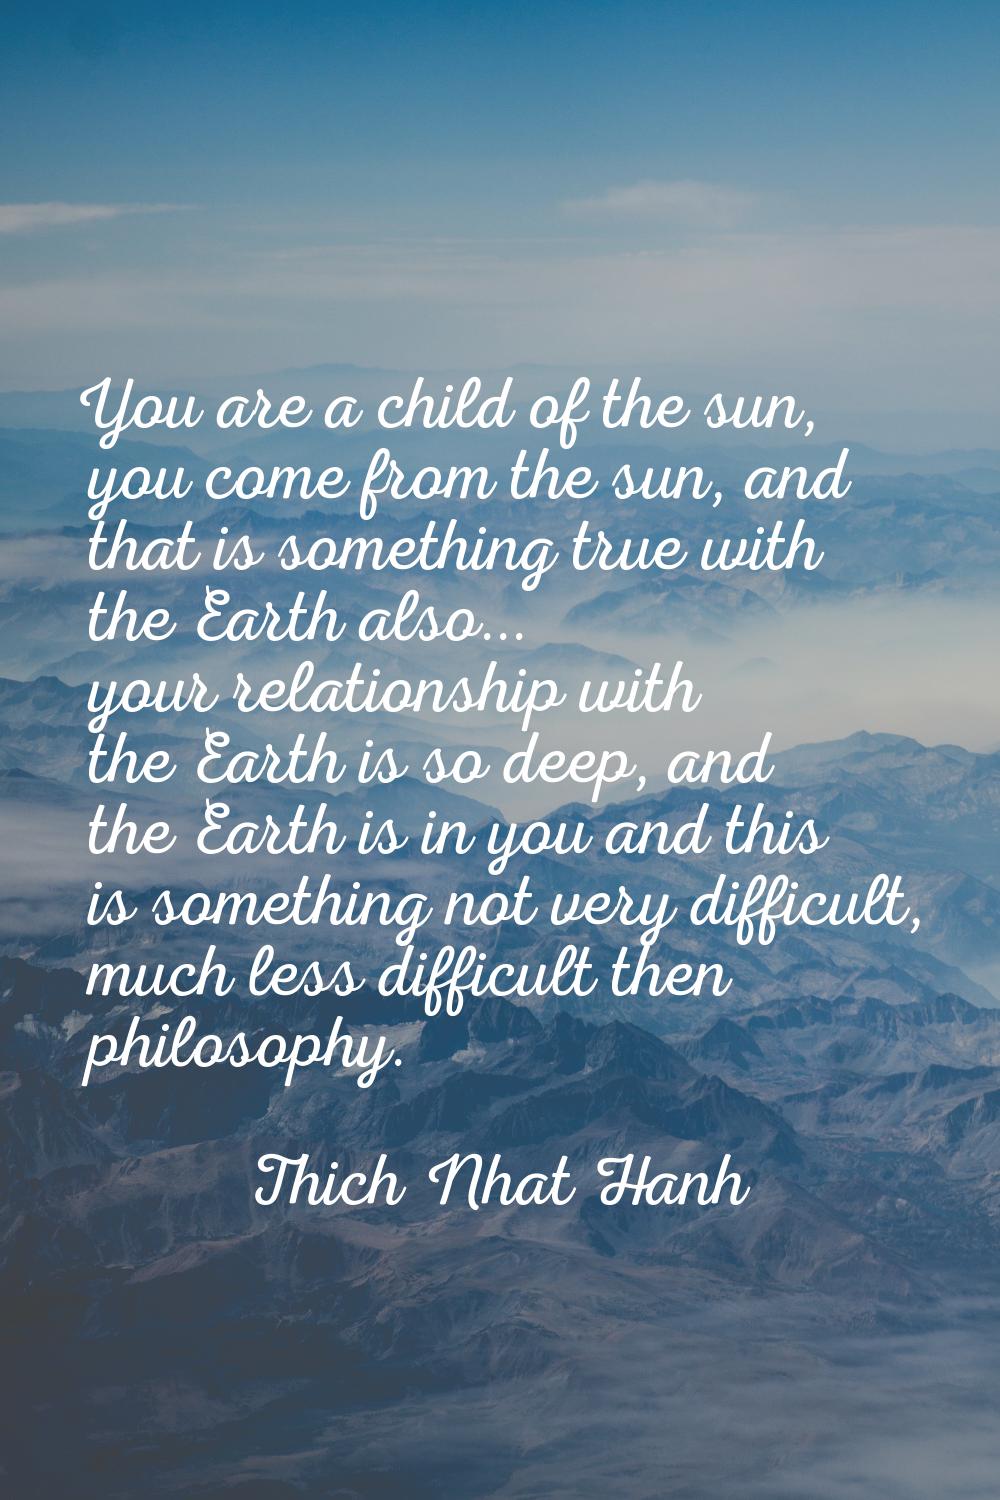 You are a child of the sun, you come from the sun, and that is something true with the Earth also..